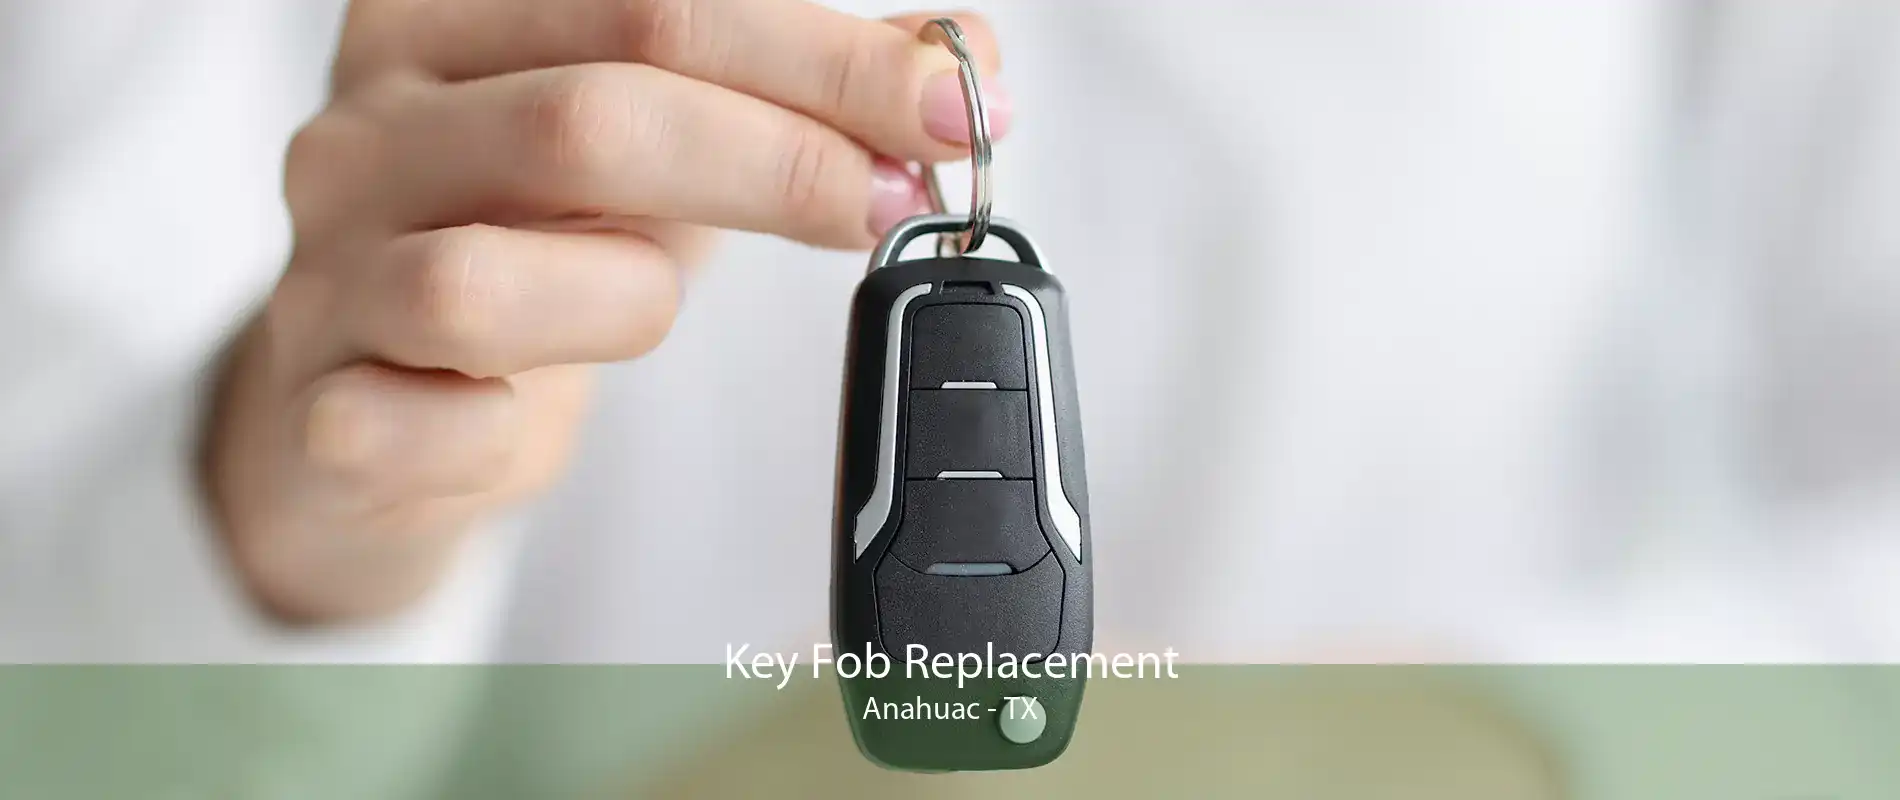 Key Fob Replacement Anahuac - TX